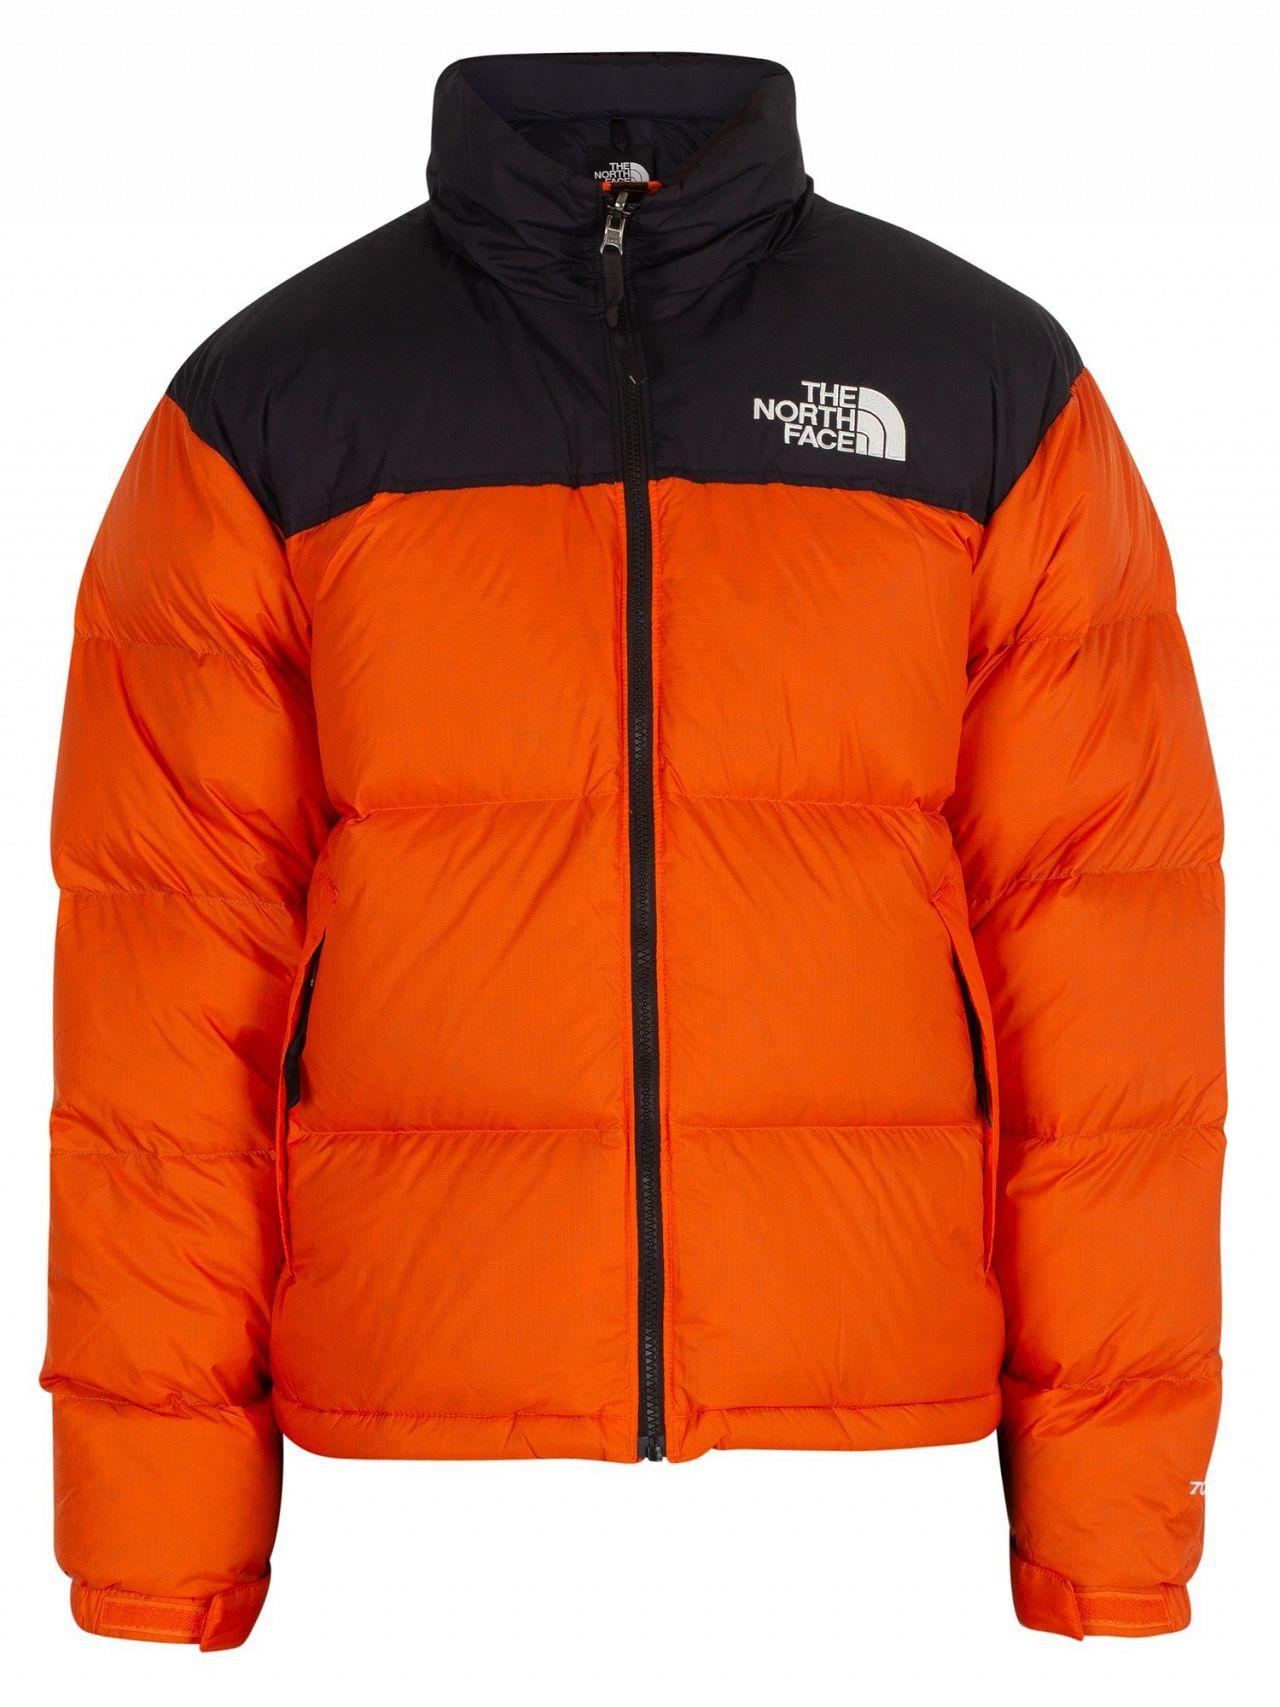 Lyst - The North Face Nuptse 1996 Jacket in Orange for Men